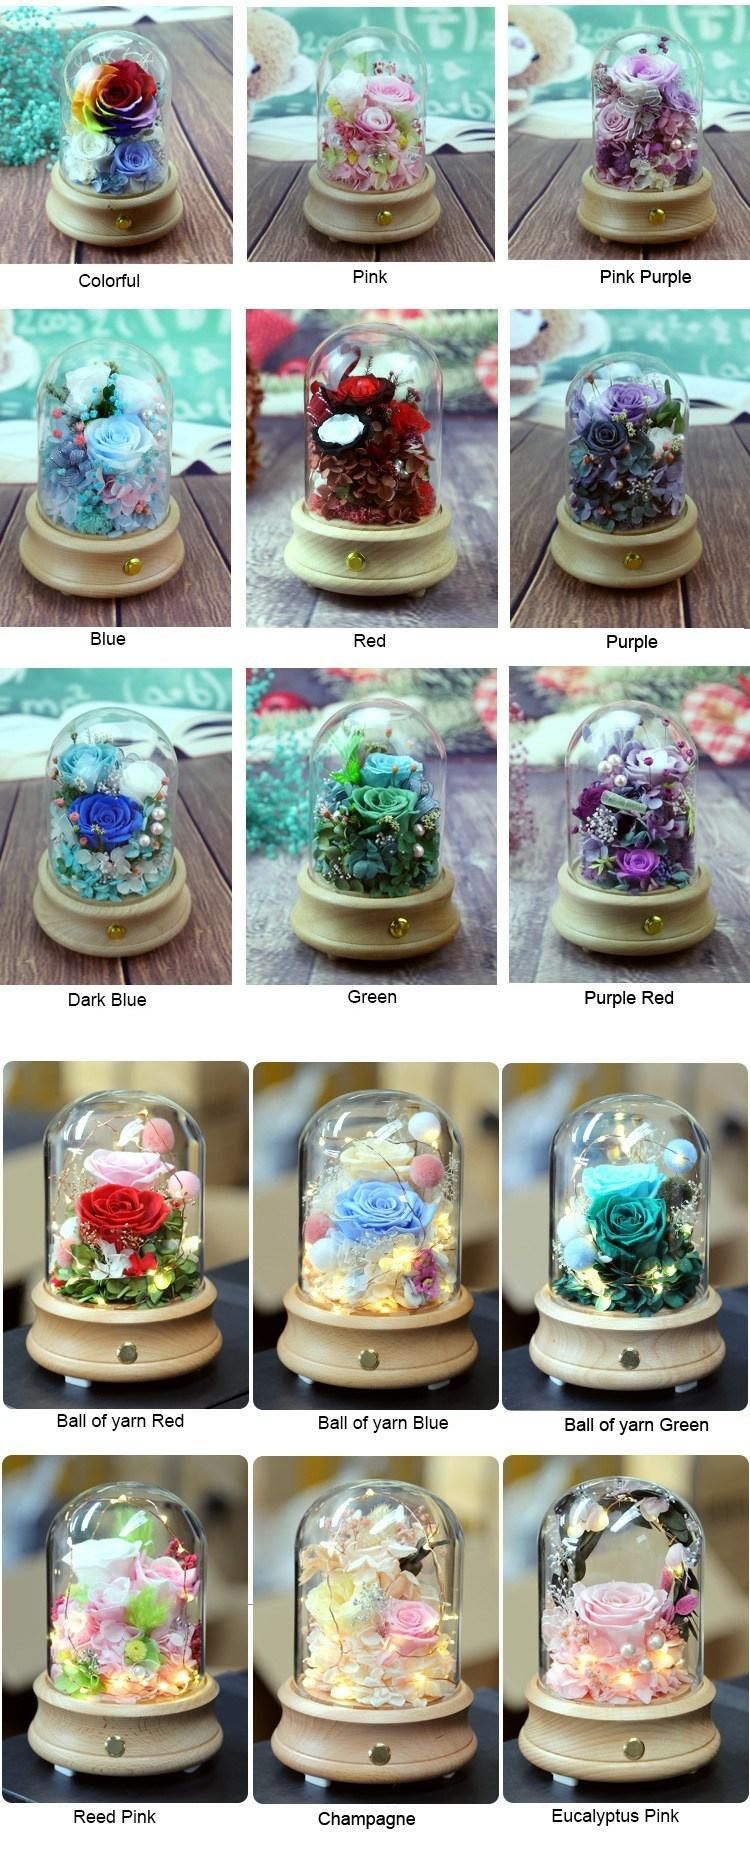 2018 Hot Christmas Gift Long Lasting Preserved Roses Preserved Flower in Glass Dome with LED Light and Music Box